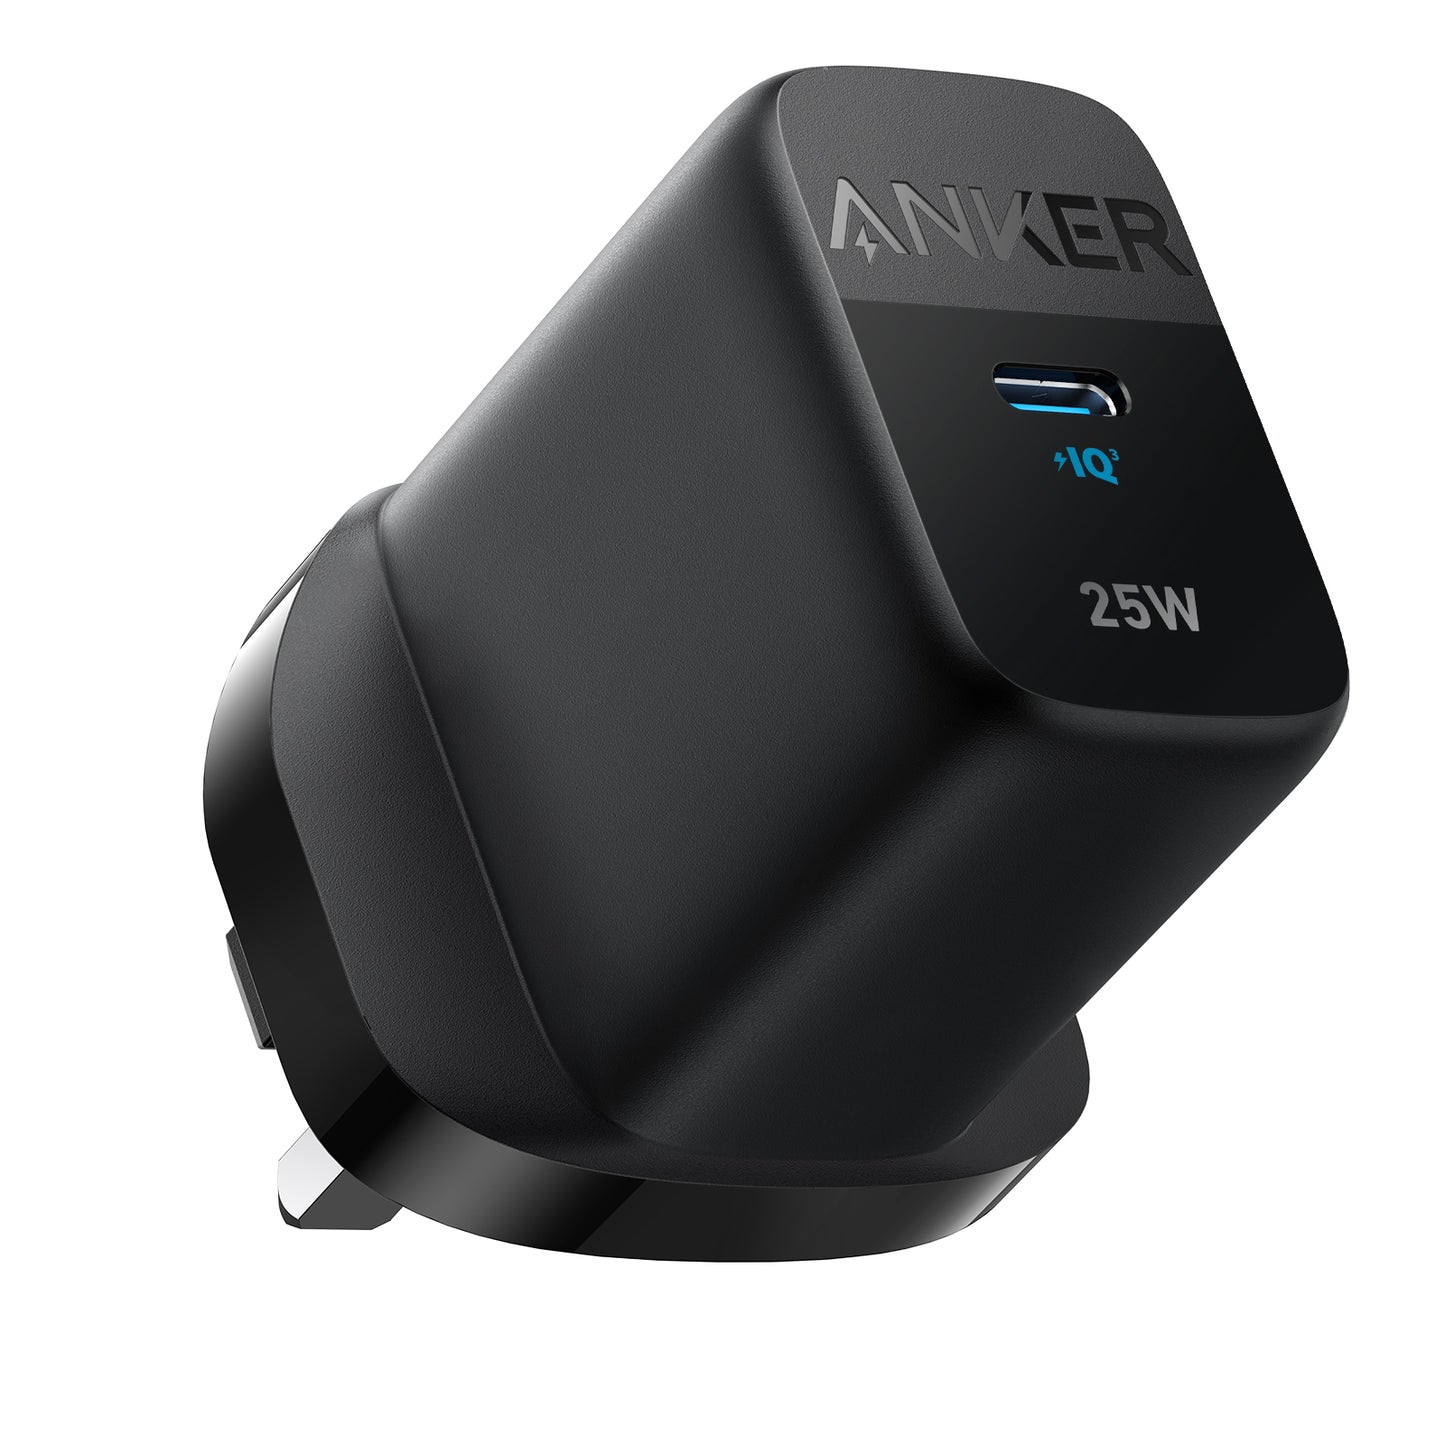 Anker 312 Charger (Ace 2, 25W) PPS 25W 牆插充電器